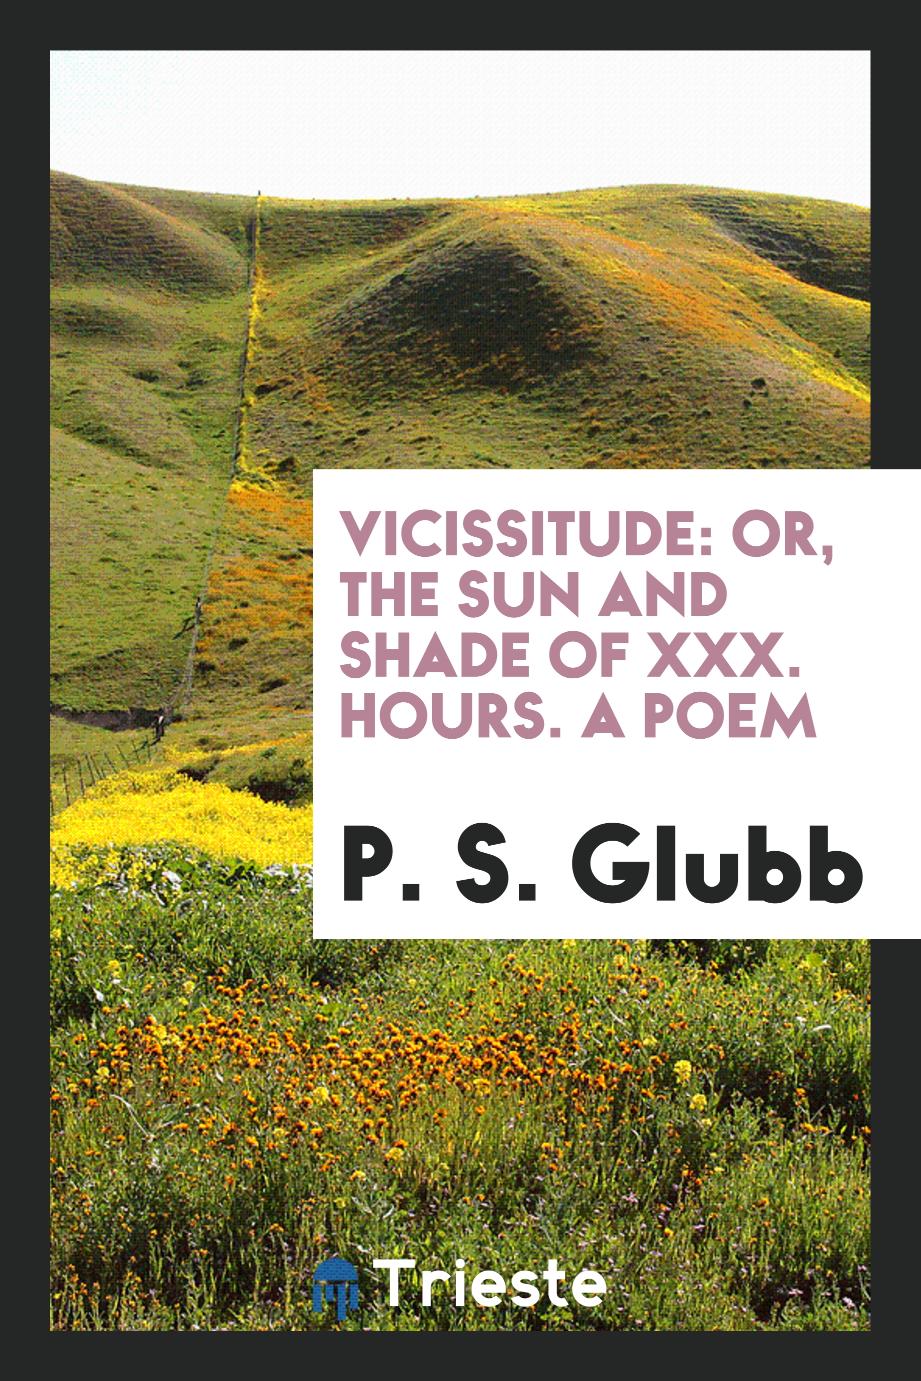 Vicissitude: Or, the Sun and Shade of XXX. Hours. A Poem